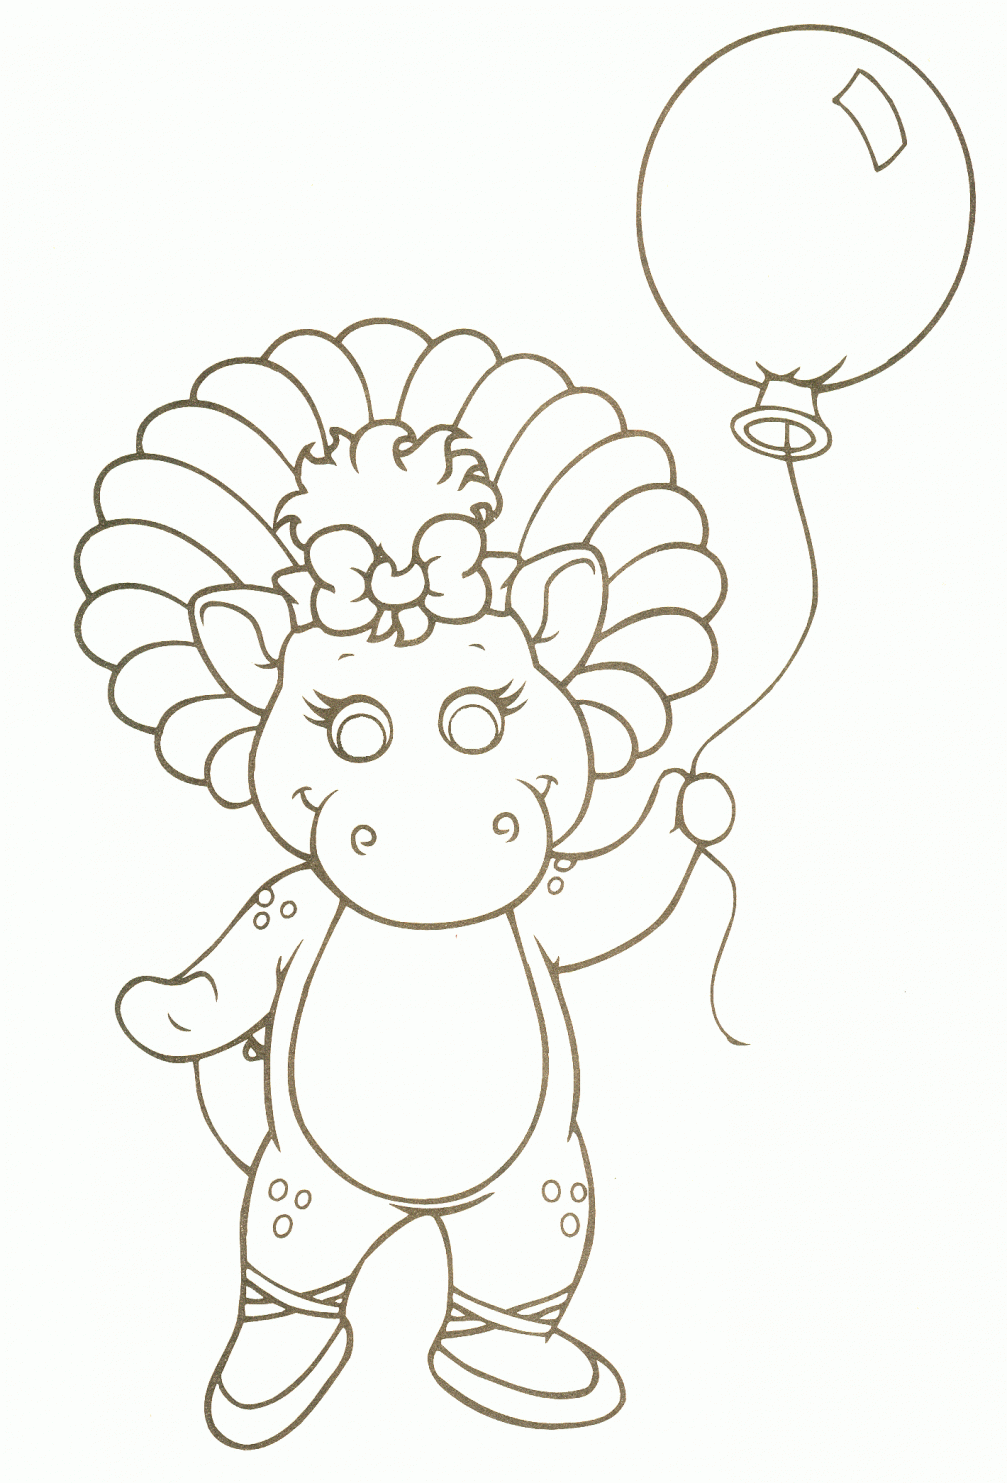 Baby bop coloring pages download and print for free